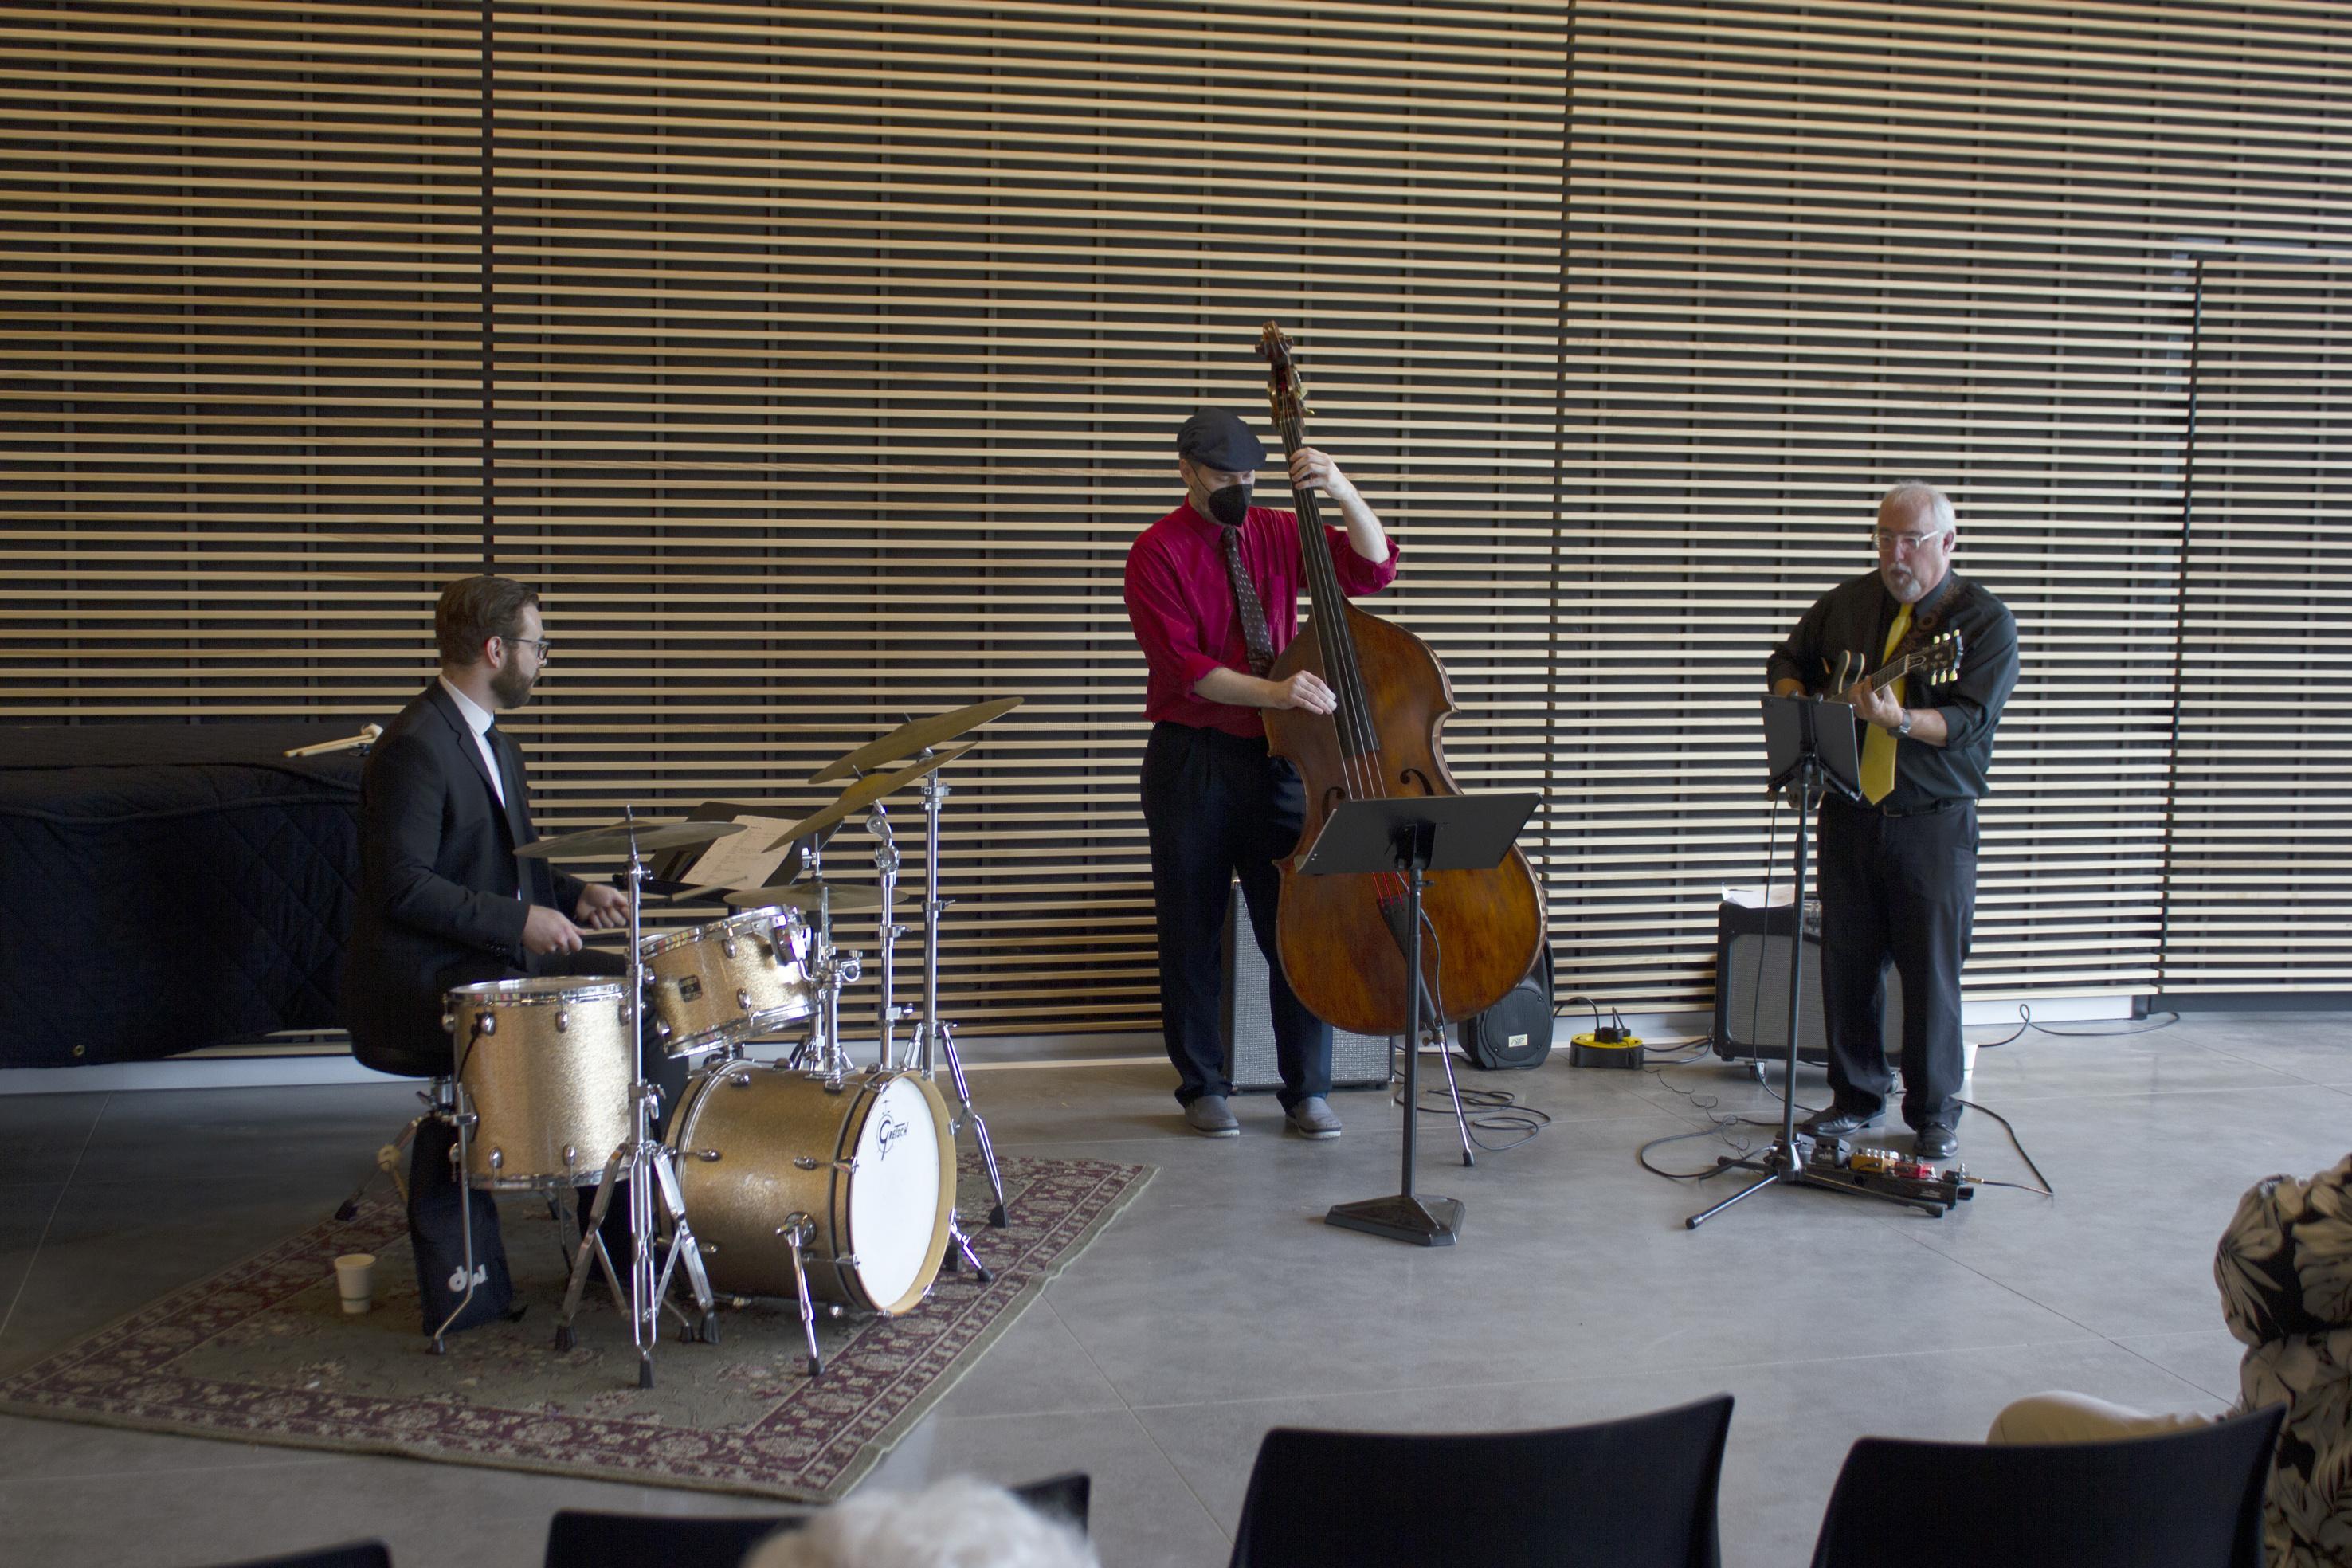 A trio of jazz musicians: drums, upright bass, guitar